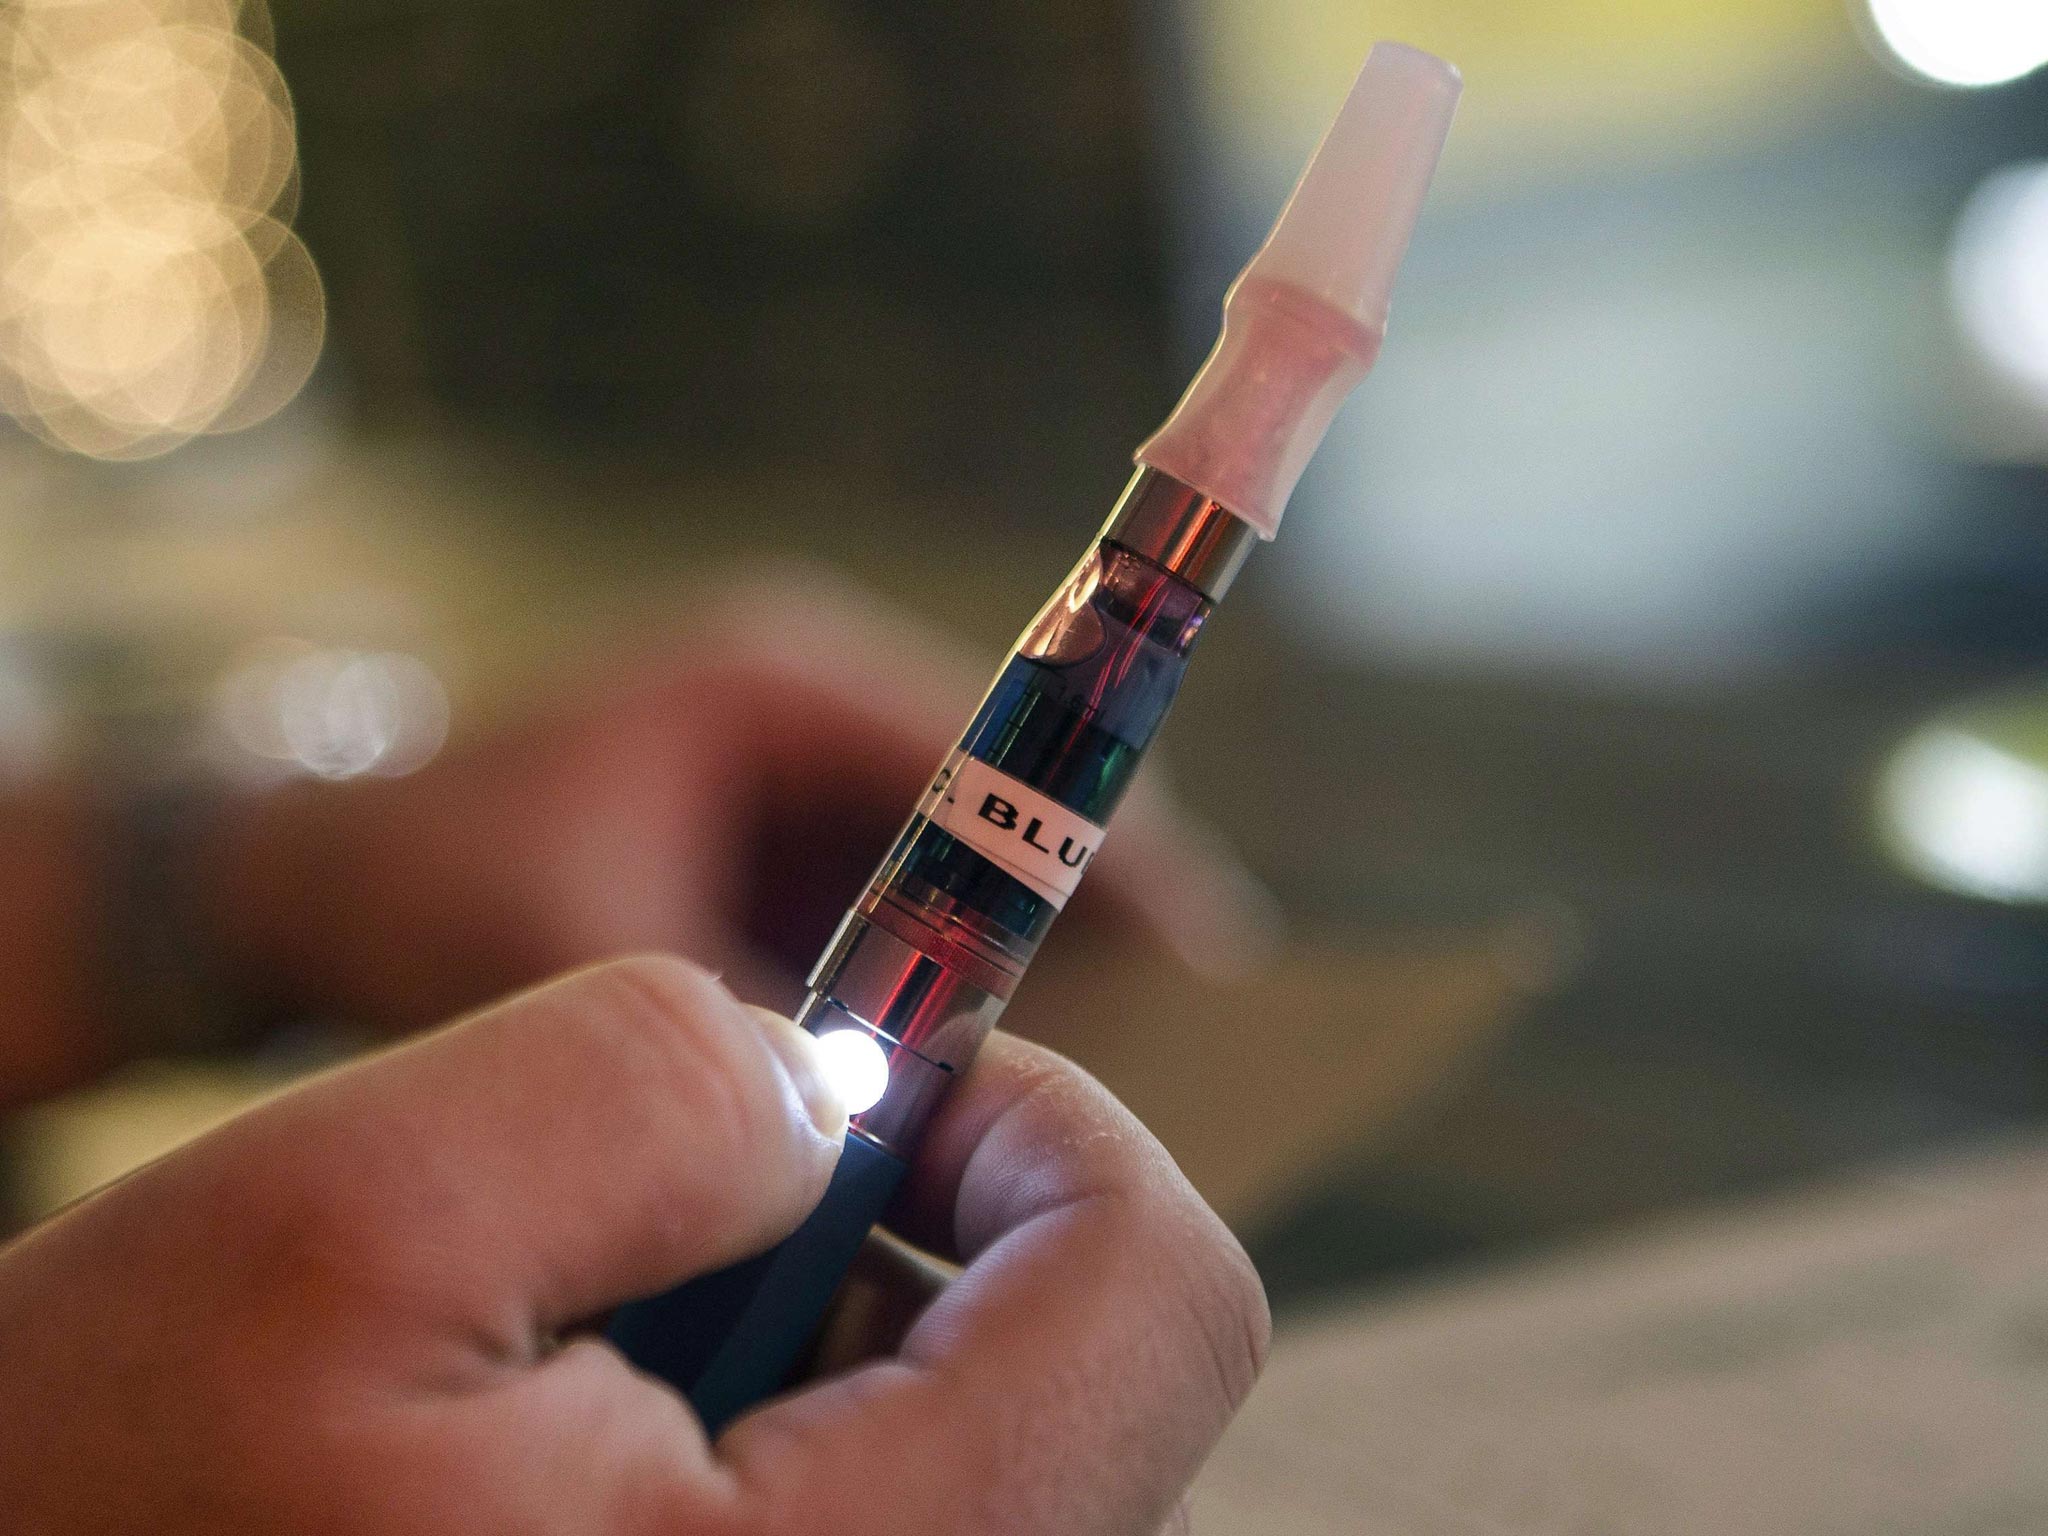 Research has found that electronic cigarettes could encourage young people to start smoking